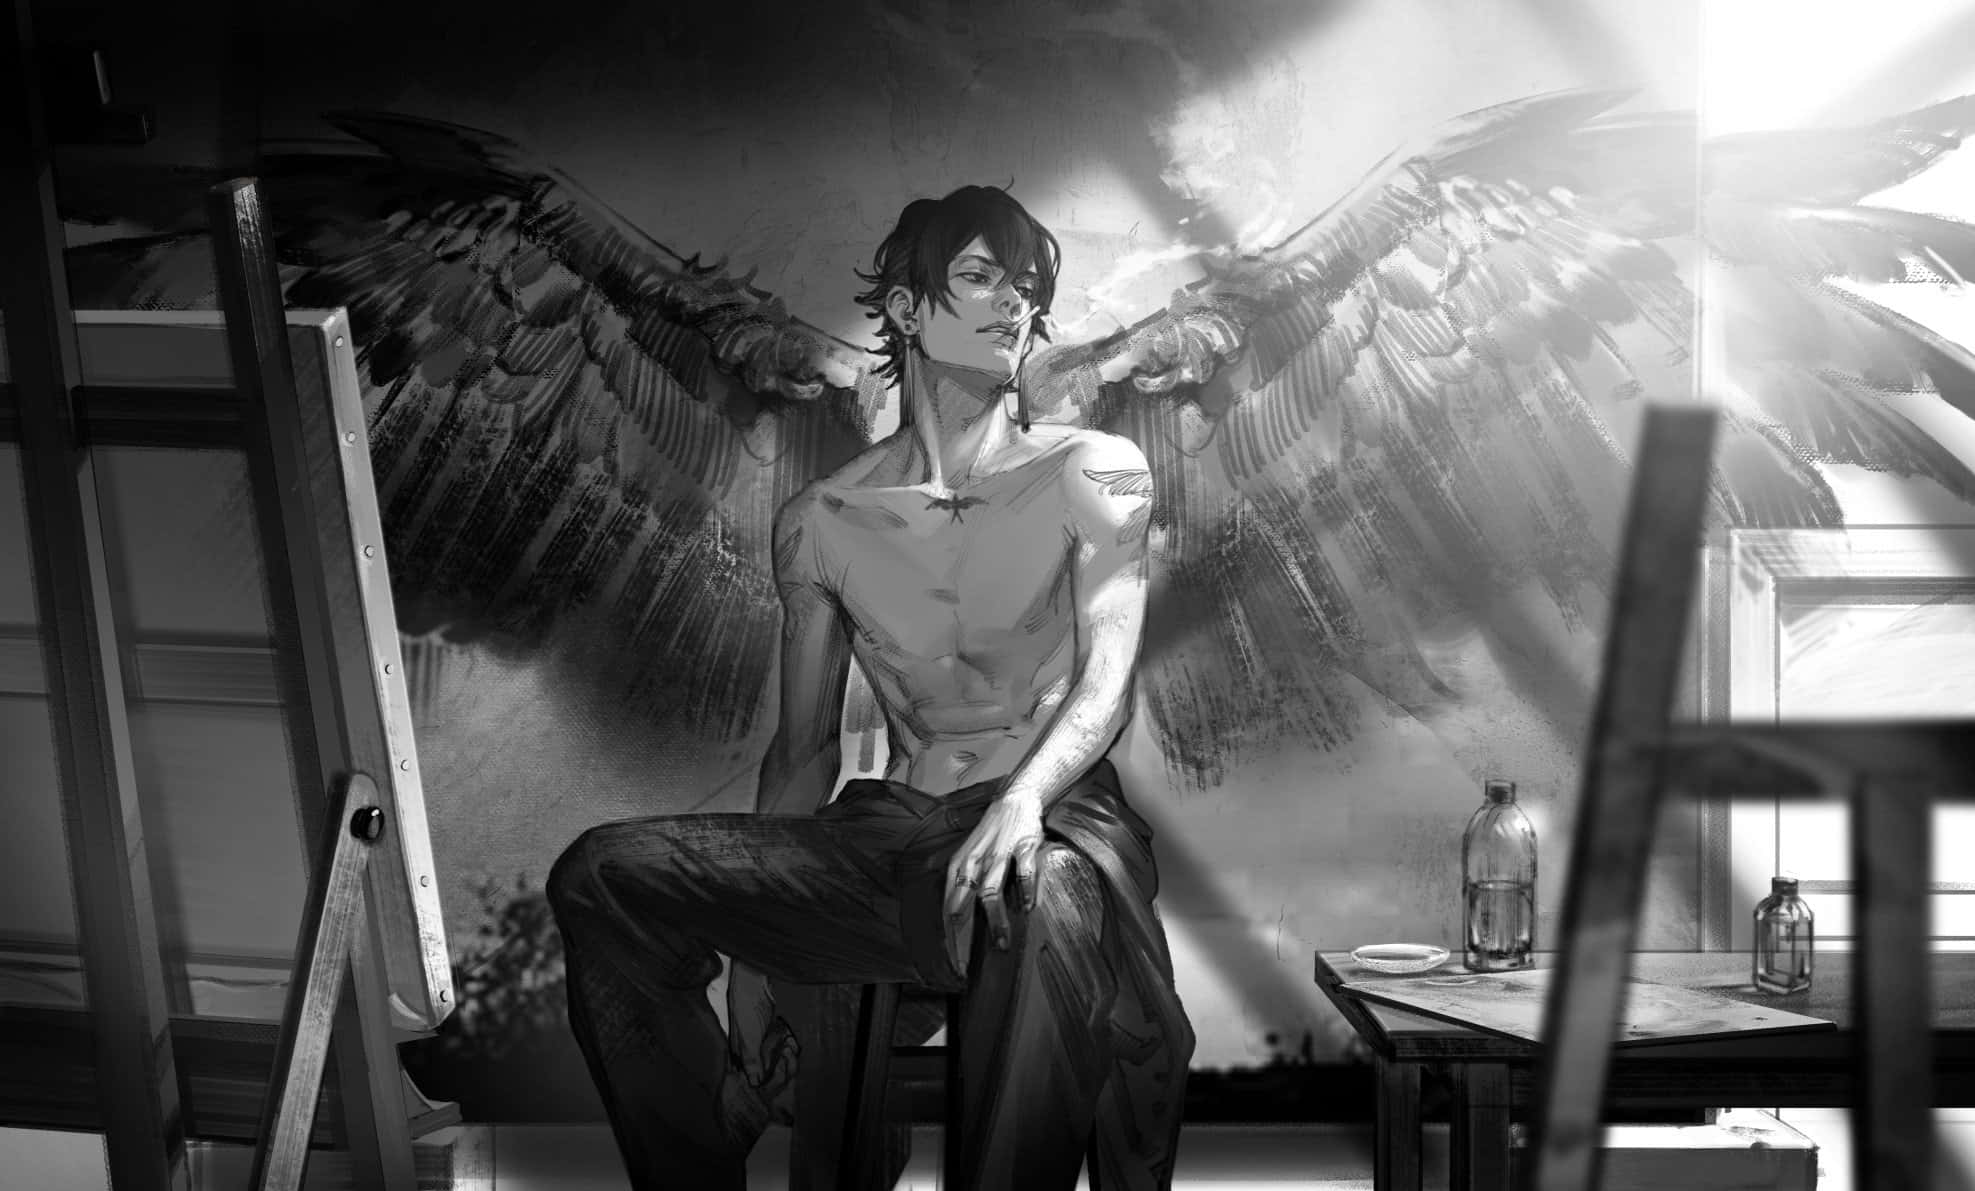 A Man With Wings Sitting On A Chair